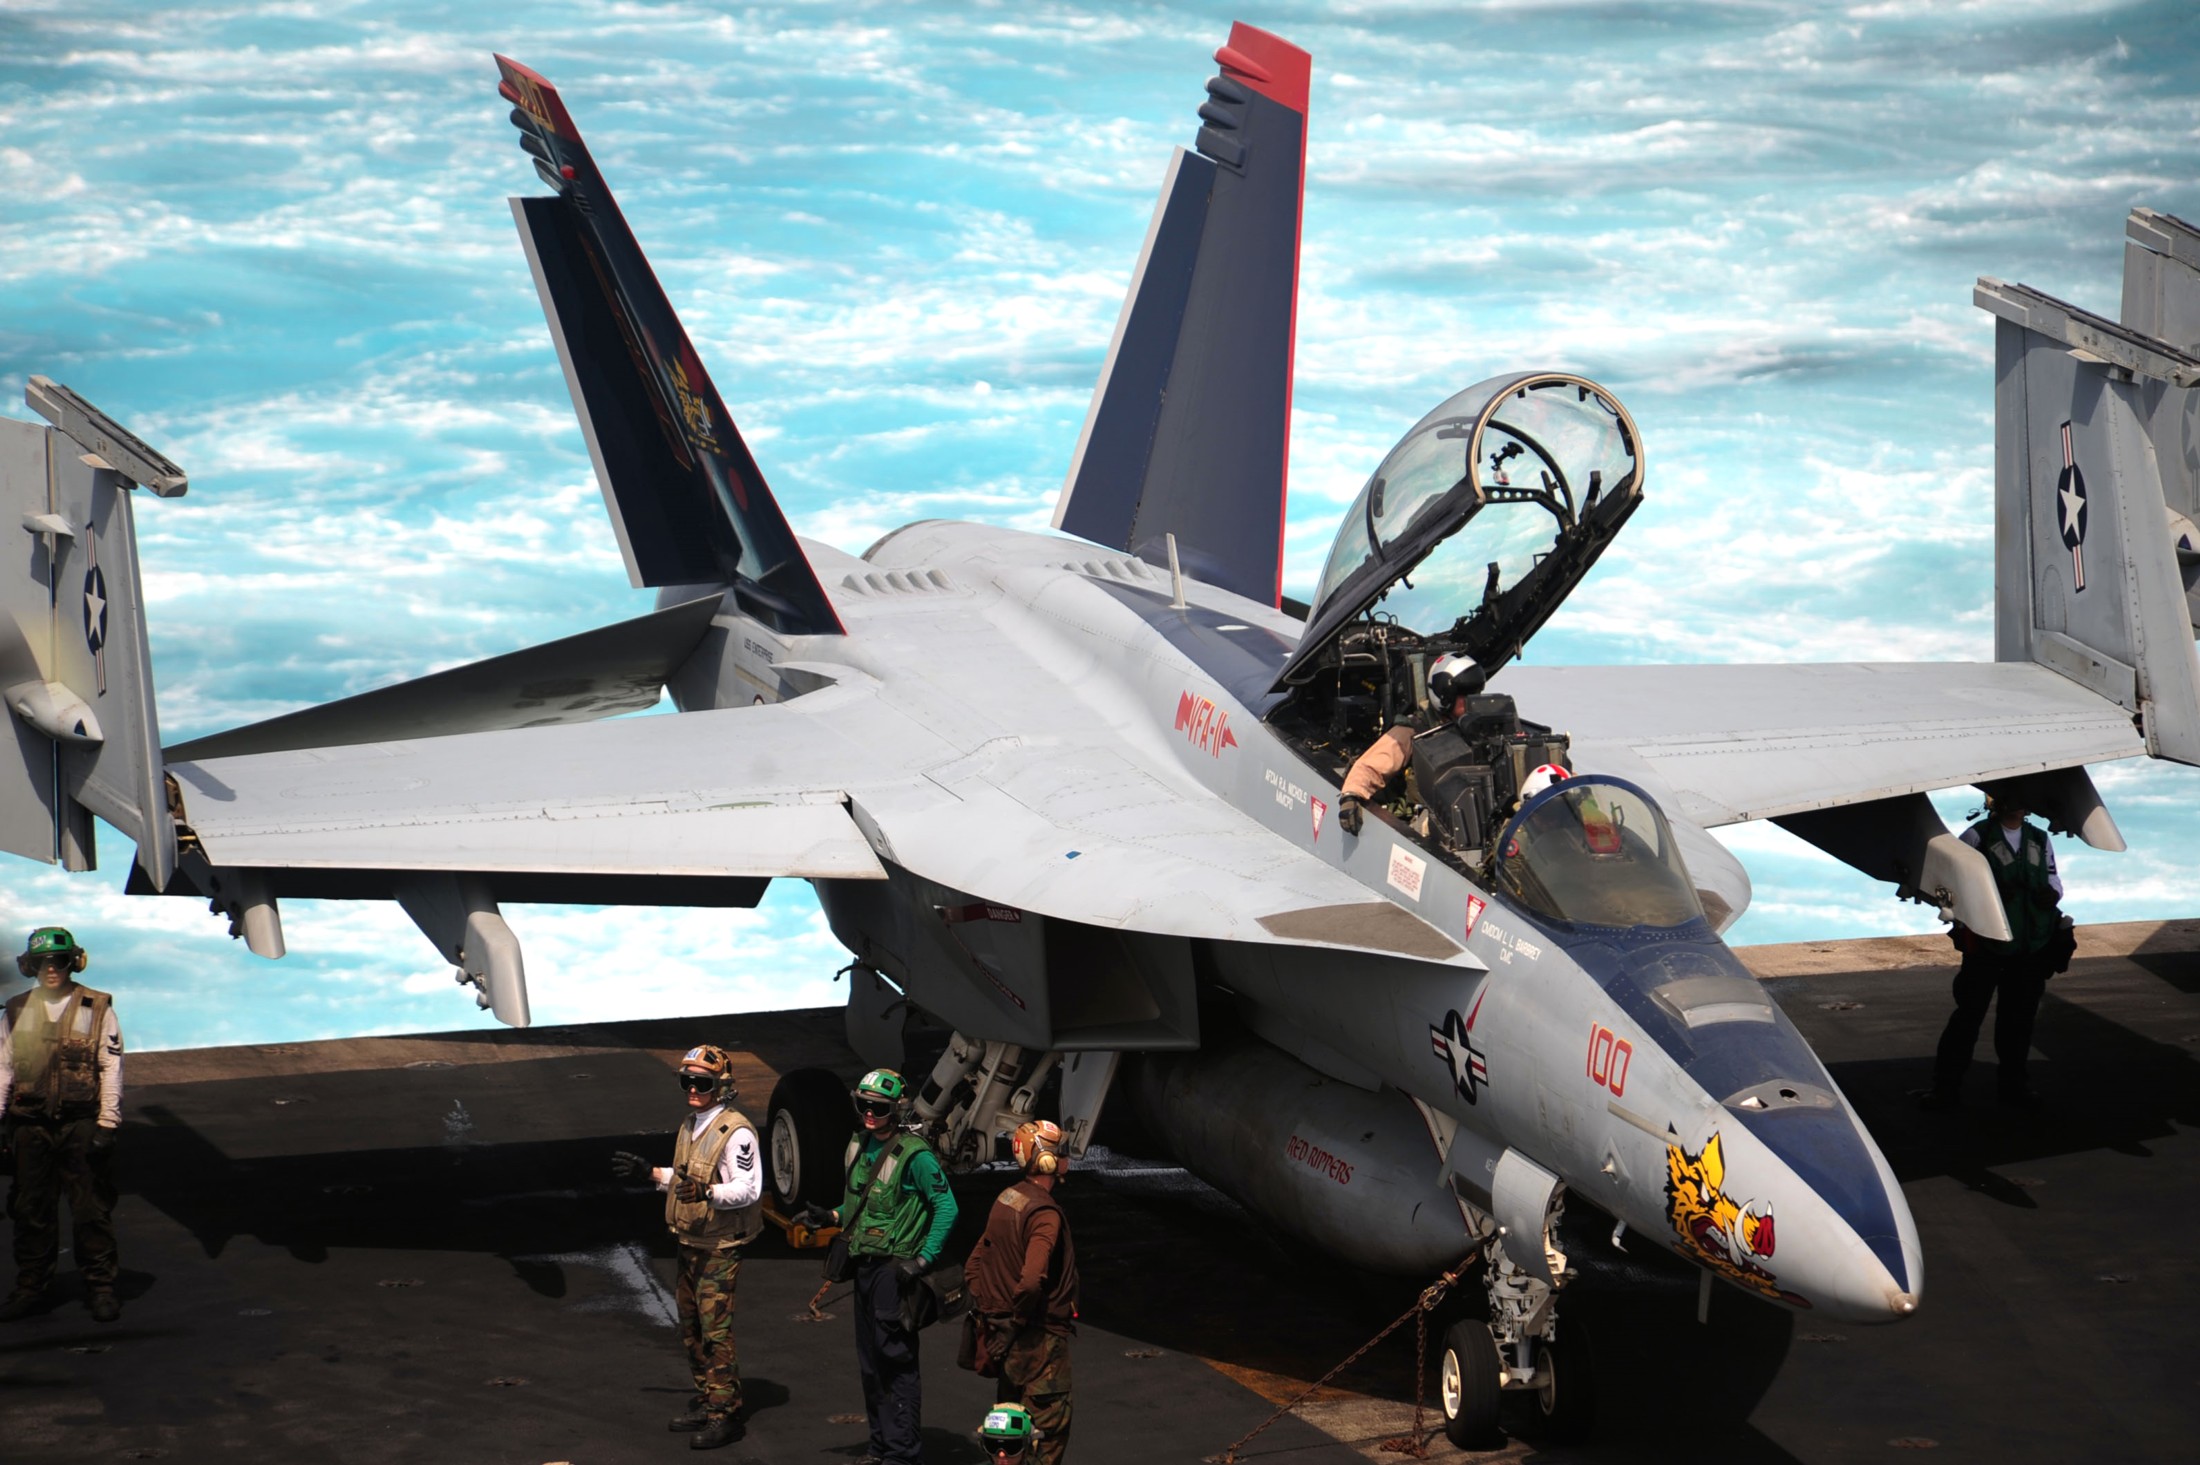 vfa-11 red rippers strike fighter squadron us navy f/a-18f super hornet carrier air wing cvw-1 uss enterprise cvn-65 34